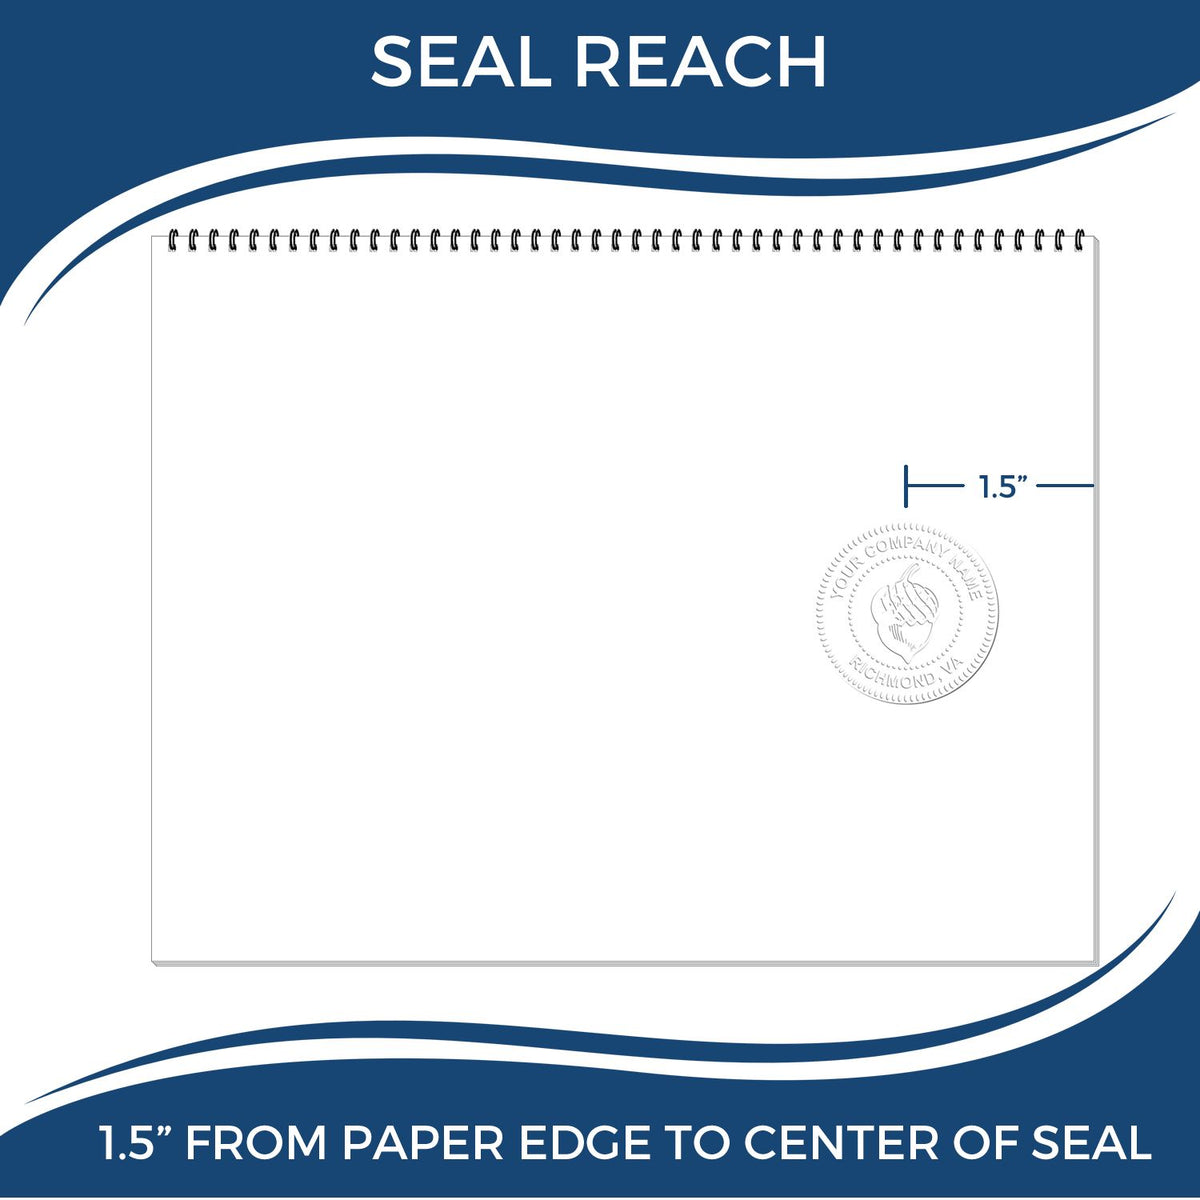 An infographic showing the seal reach which is represented by a ruler and a miniature seal image of the Hybrid Colorado Geologist Seal